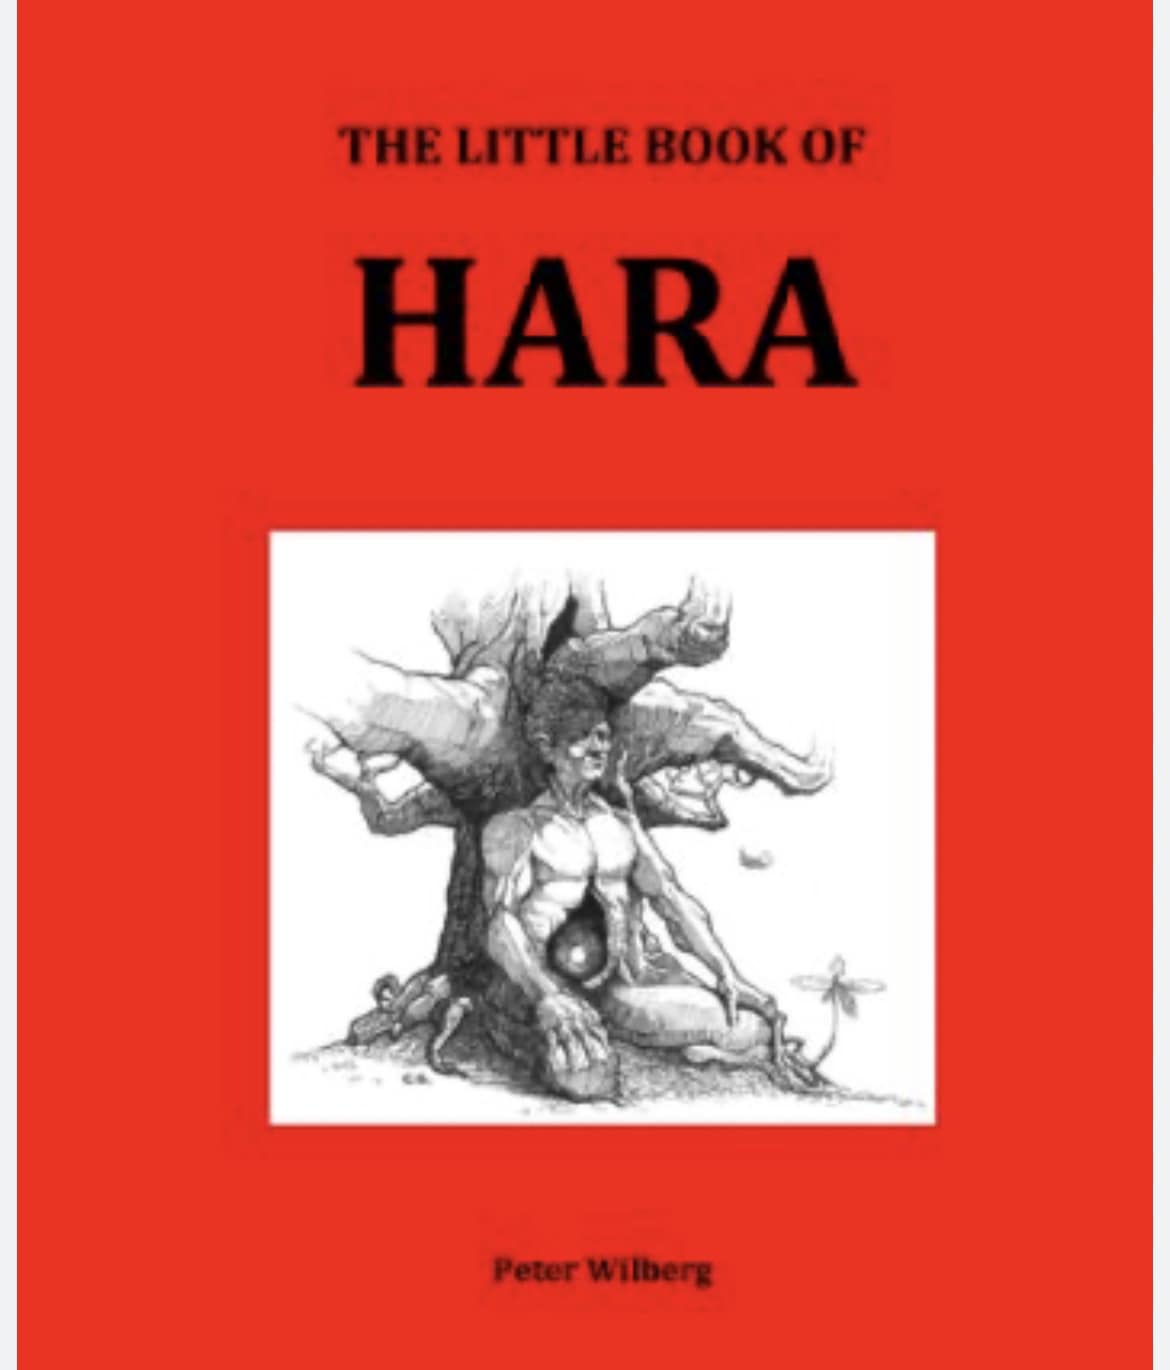 The little book of Hara